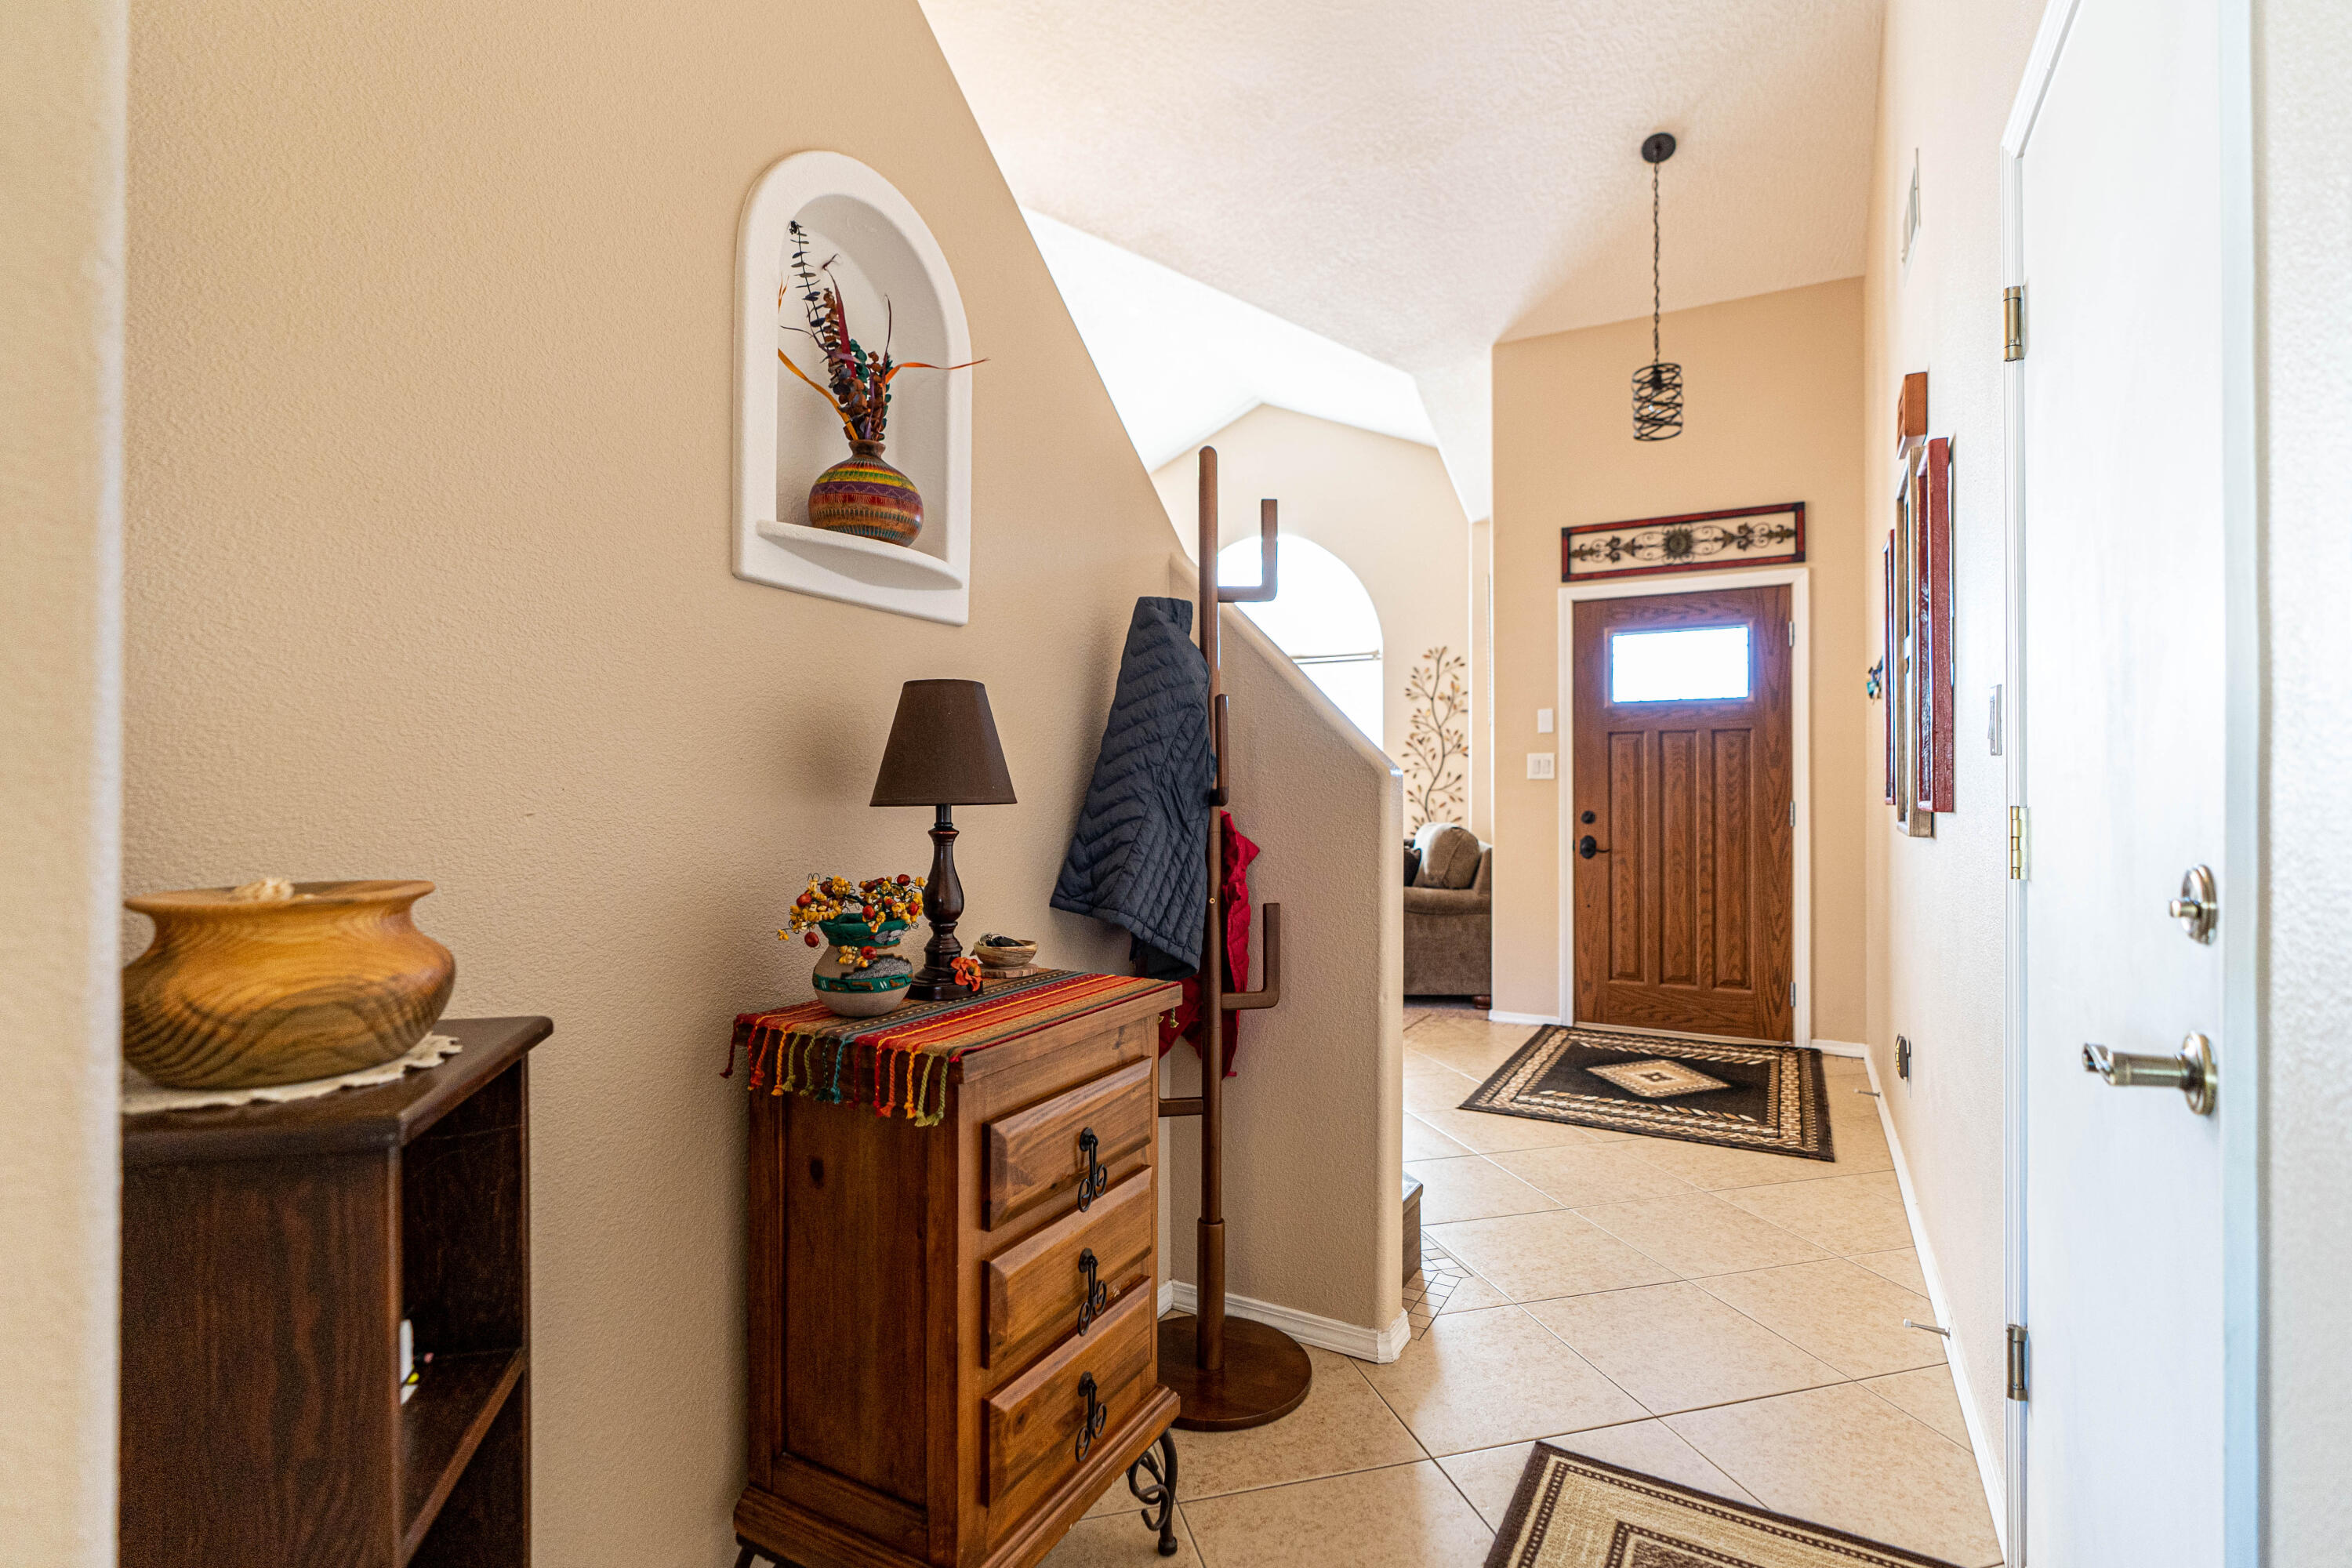 9905 Teton Place NW, Albuquerque, New Mexico 87114, 5 Bedrooms Bedrooms, ,3 BathroomsBathrooms,Residential,For Sale,9905 Teton Place NW,1061169